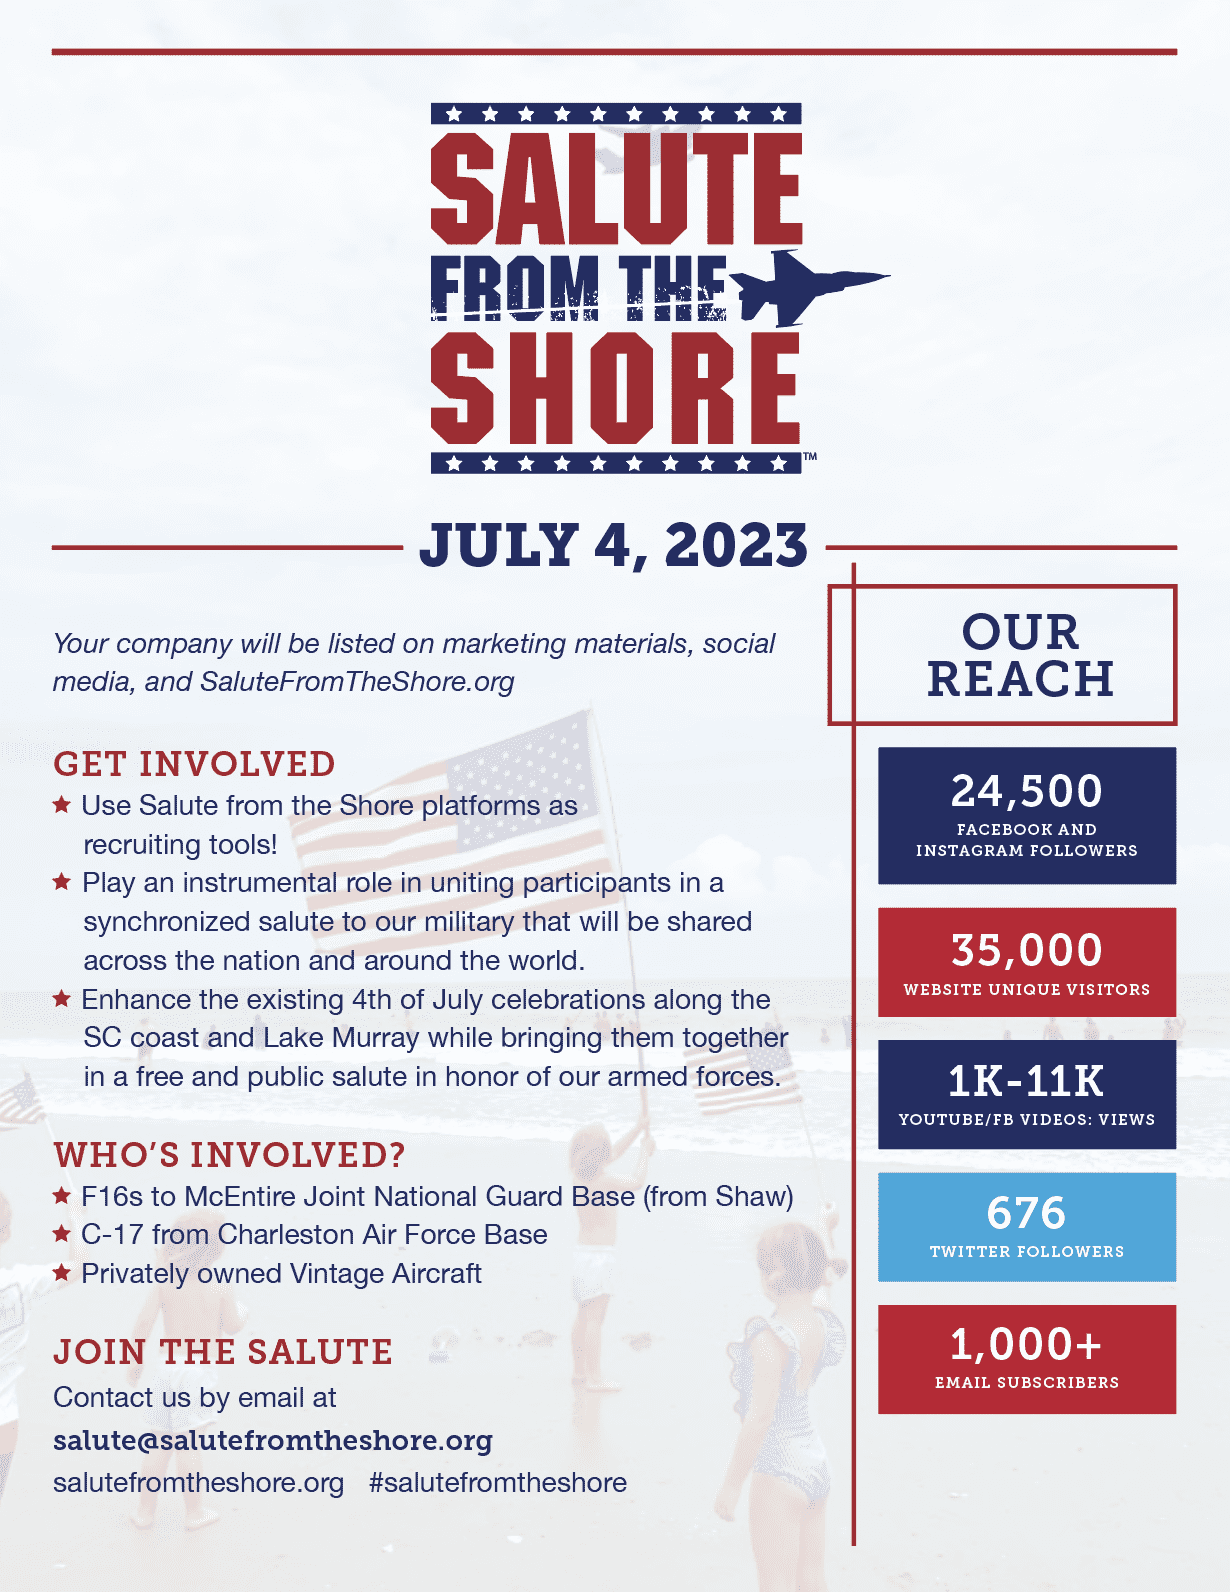 SFTS Sponsor 2023 Salute From the Shore